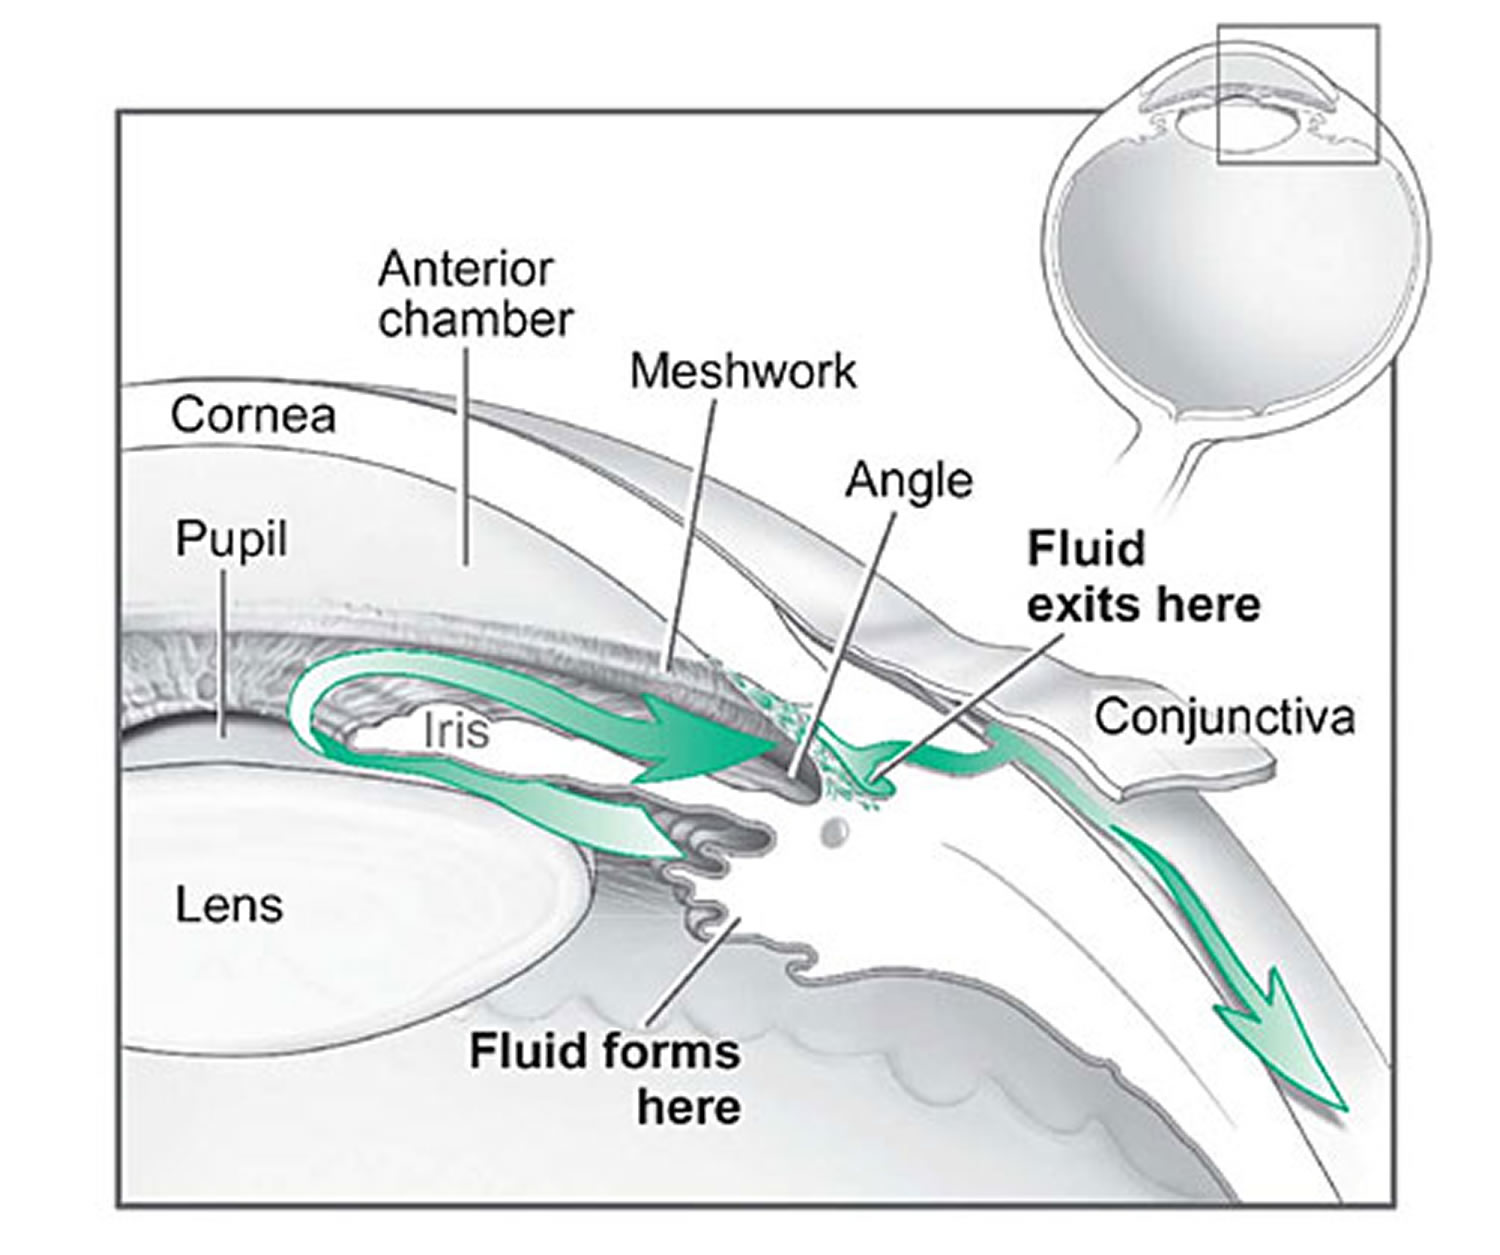 fluid pathway in the anterior chamber of the eye